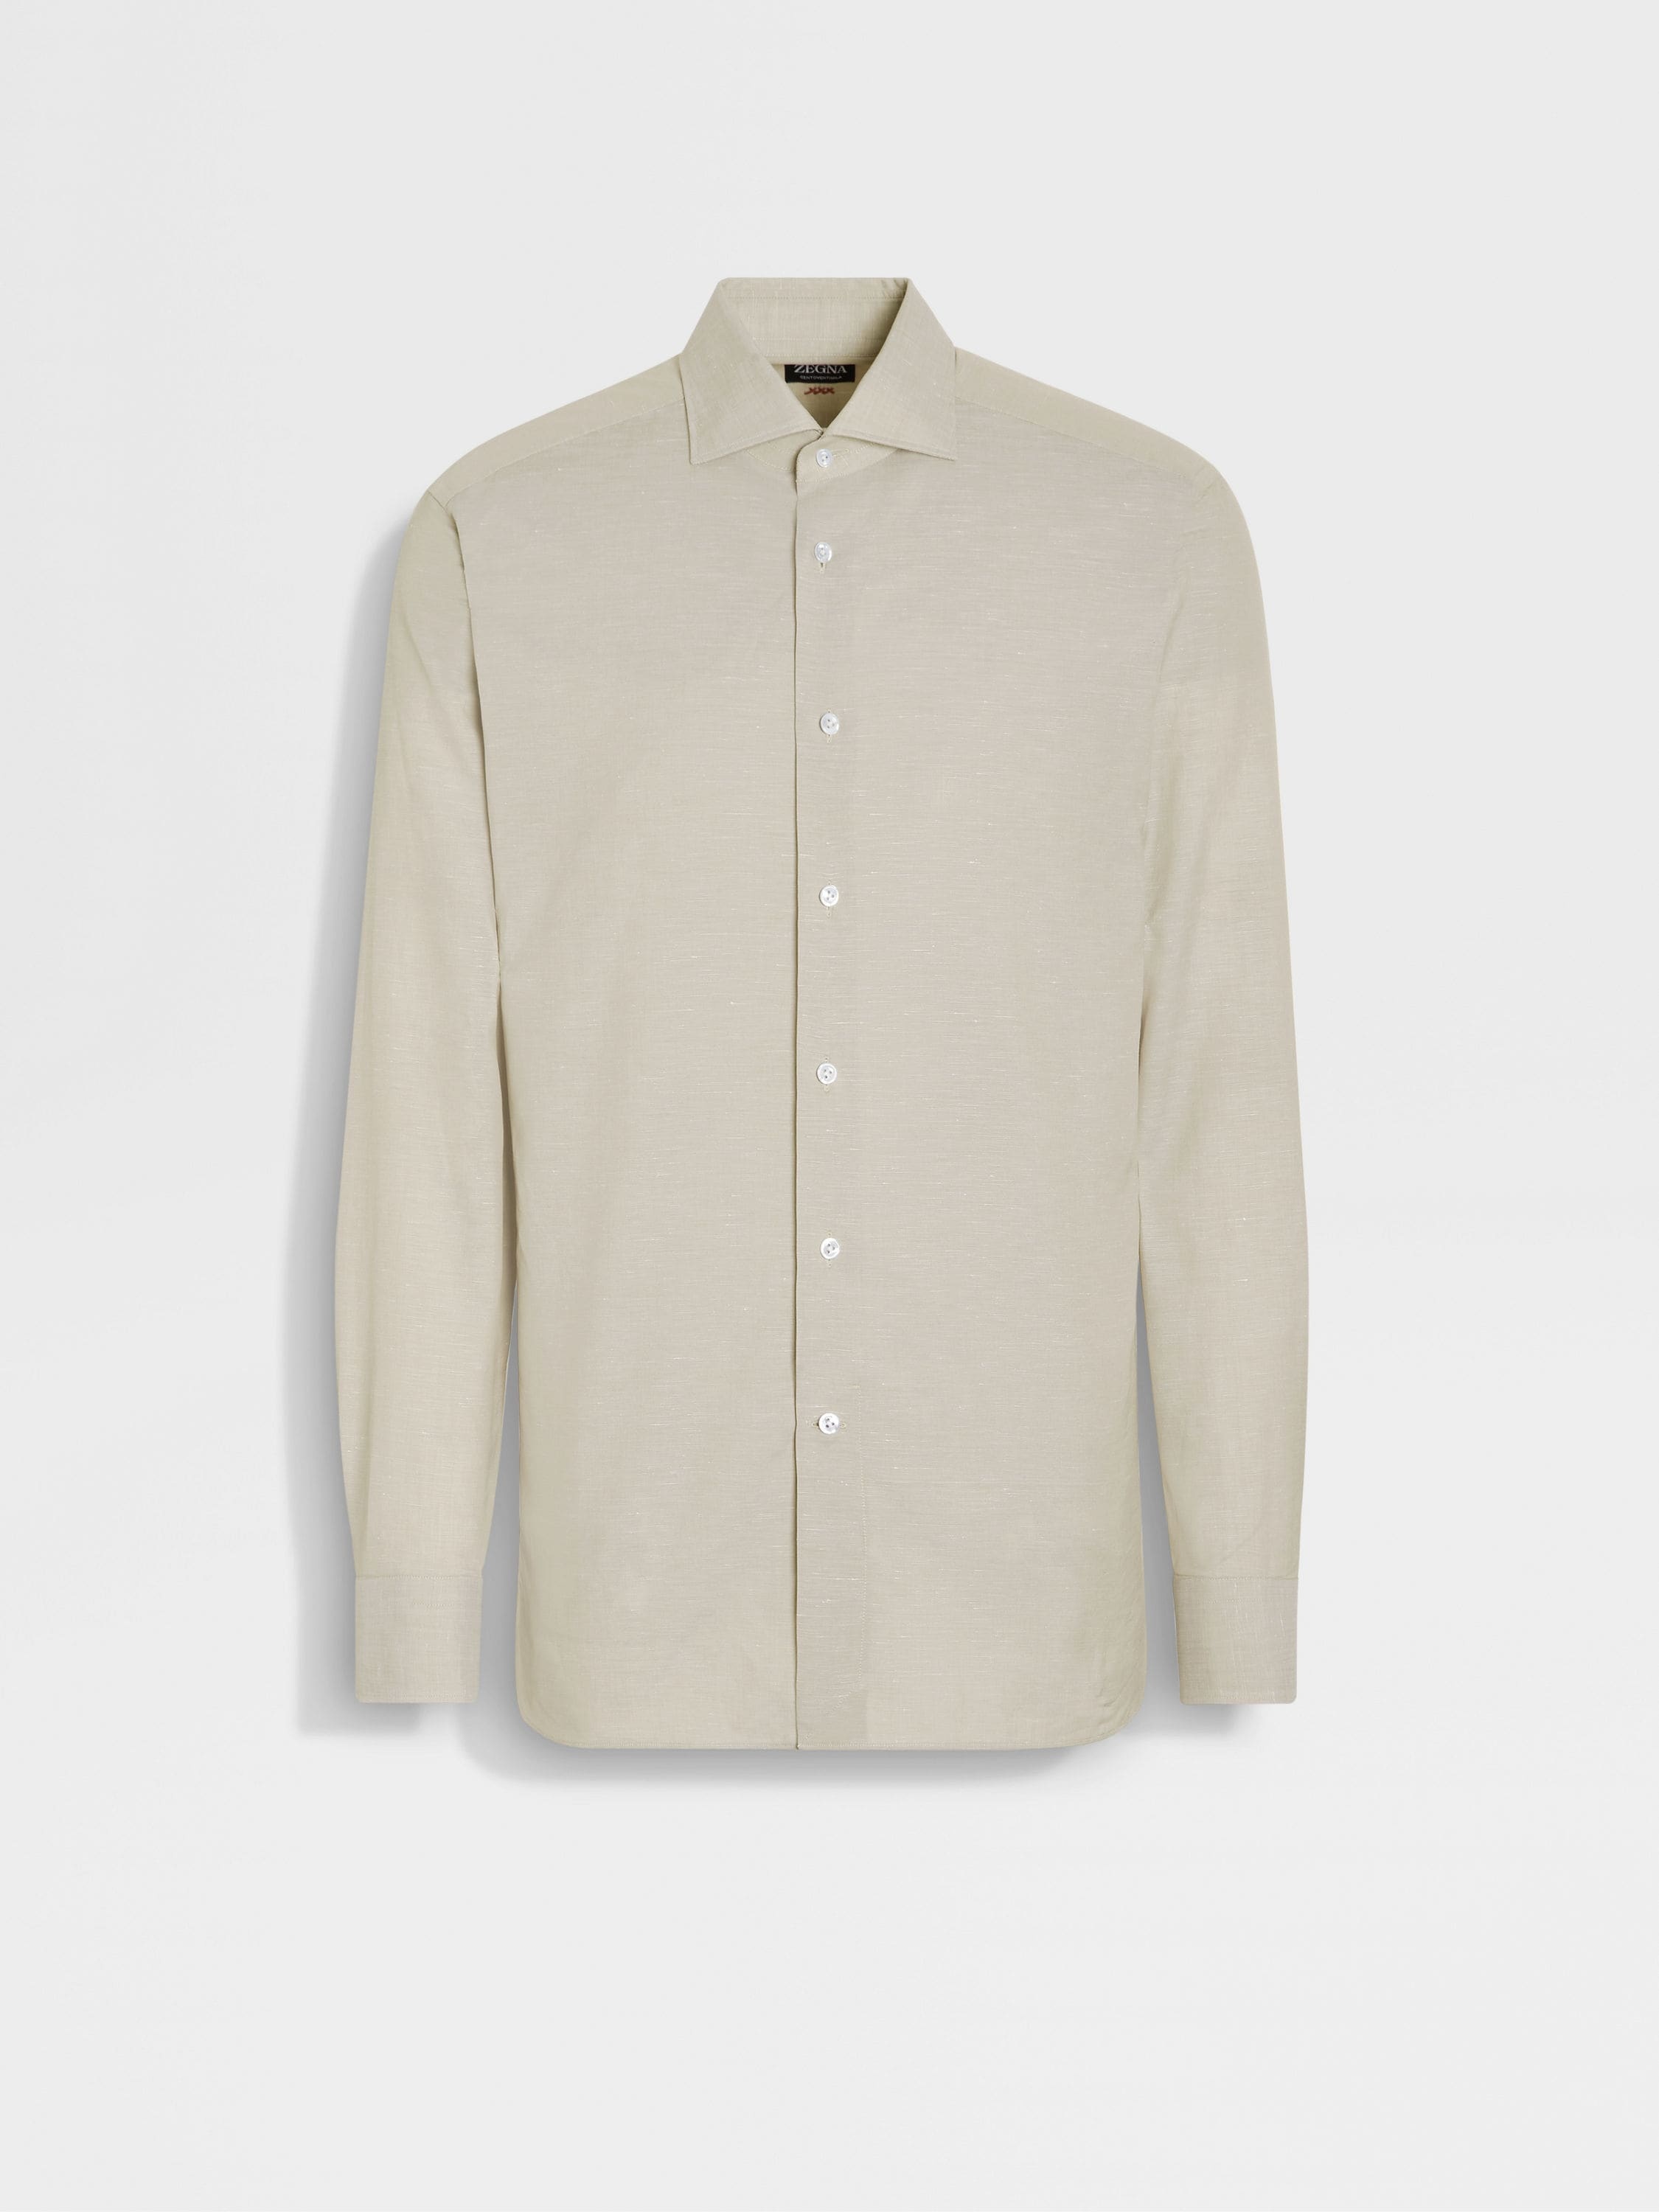 OLIVE GREEN CENTOVENTIMILA COTTON AND LINEN SHIRT - 1